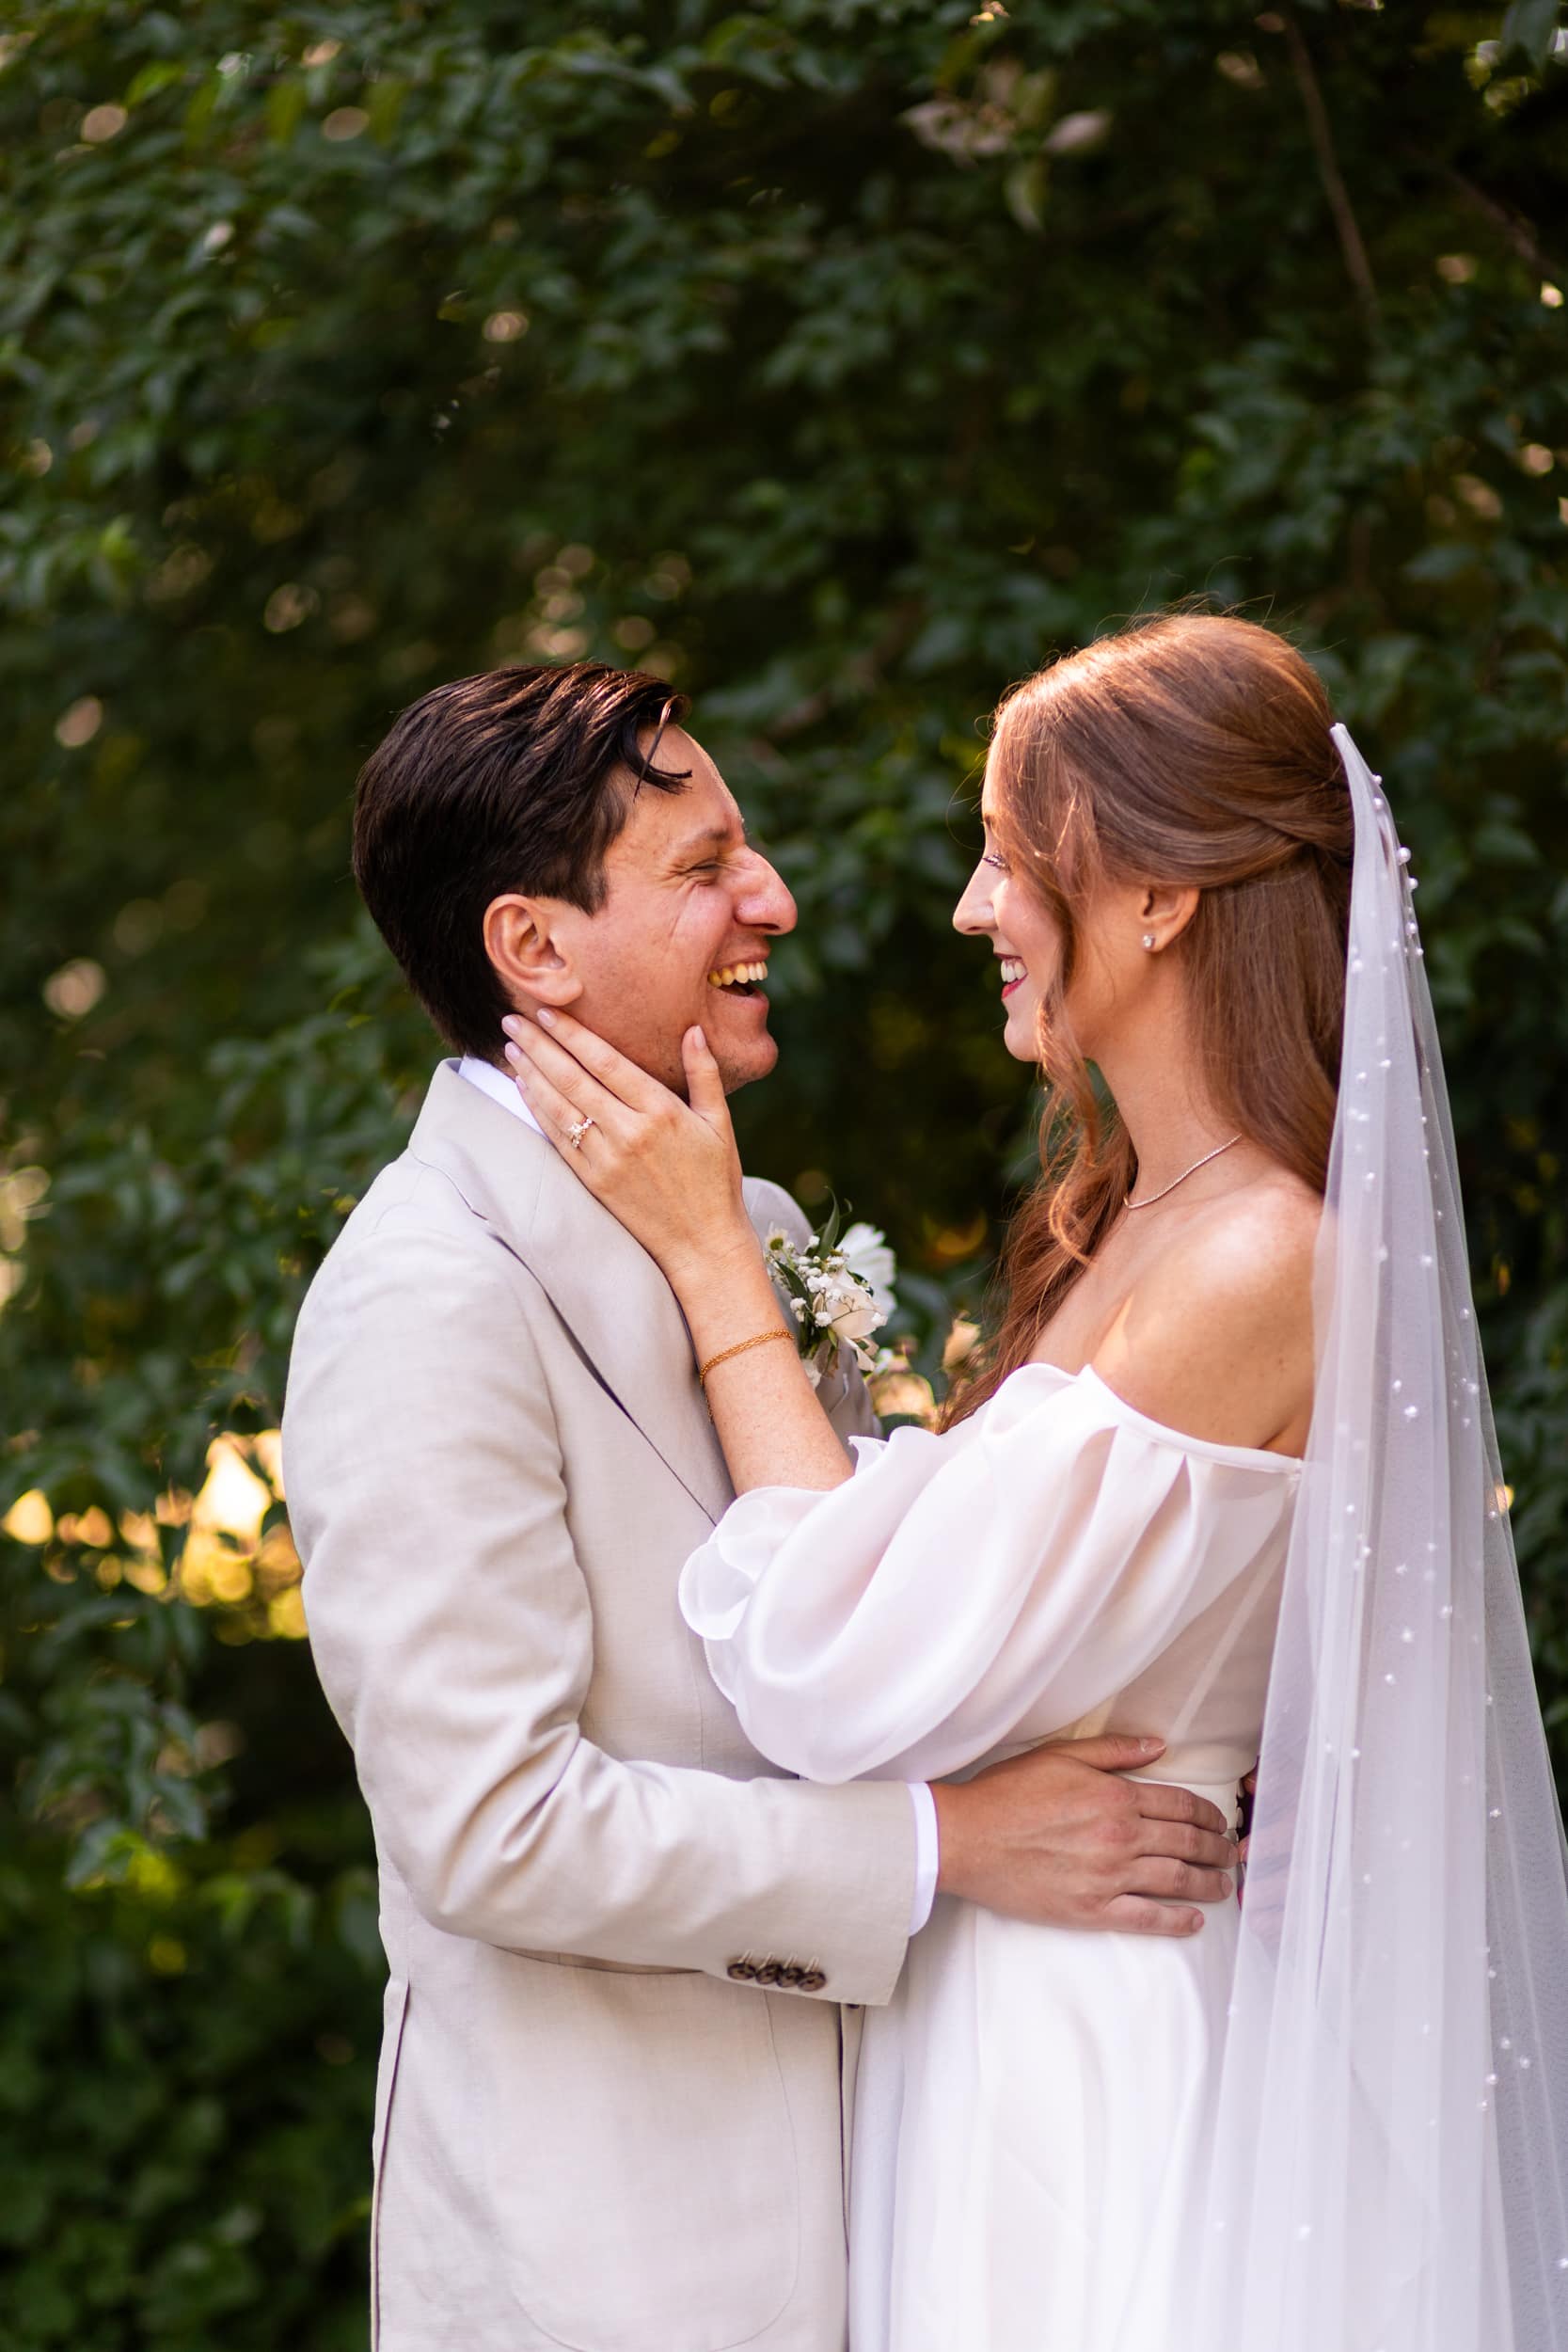 Bride and groom laughing during portraits at Volunteer Park in downtown Seattle before their intimate ceremony.